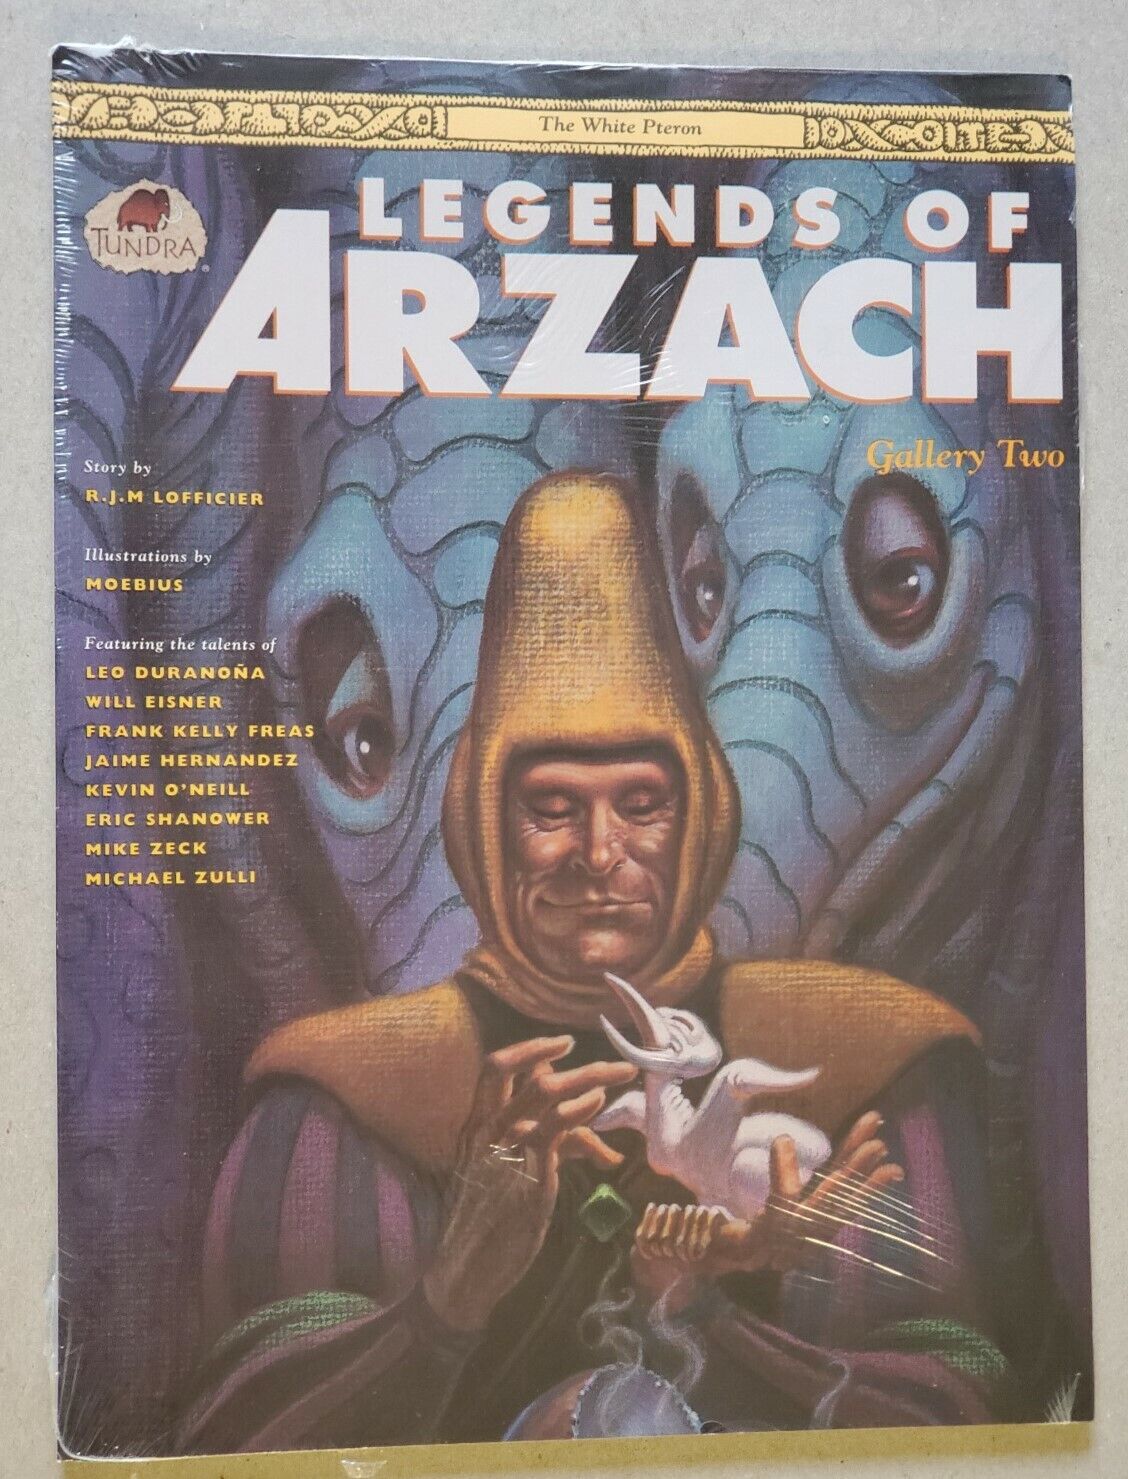 Legends Of Arzach Gallery Two Portfolio Tundra Moebius sealed FLAT RATE SHIPPING